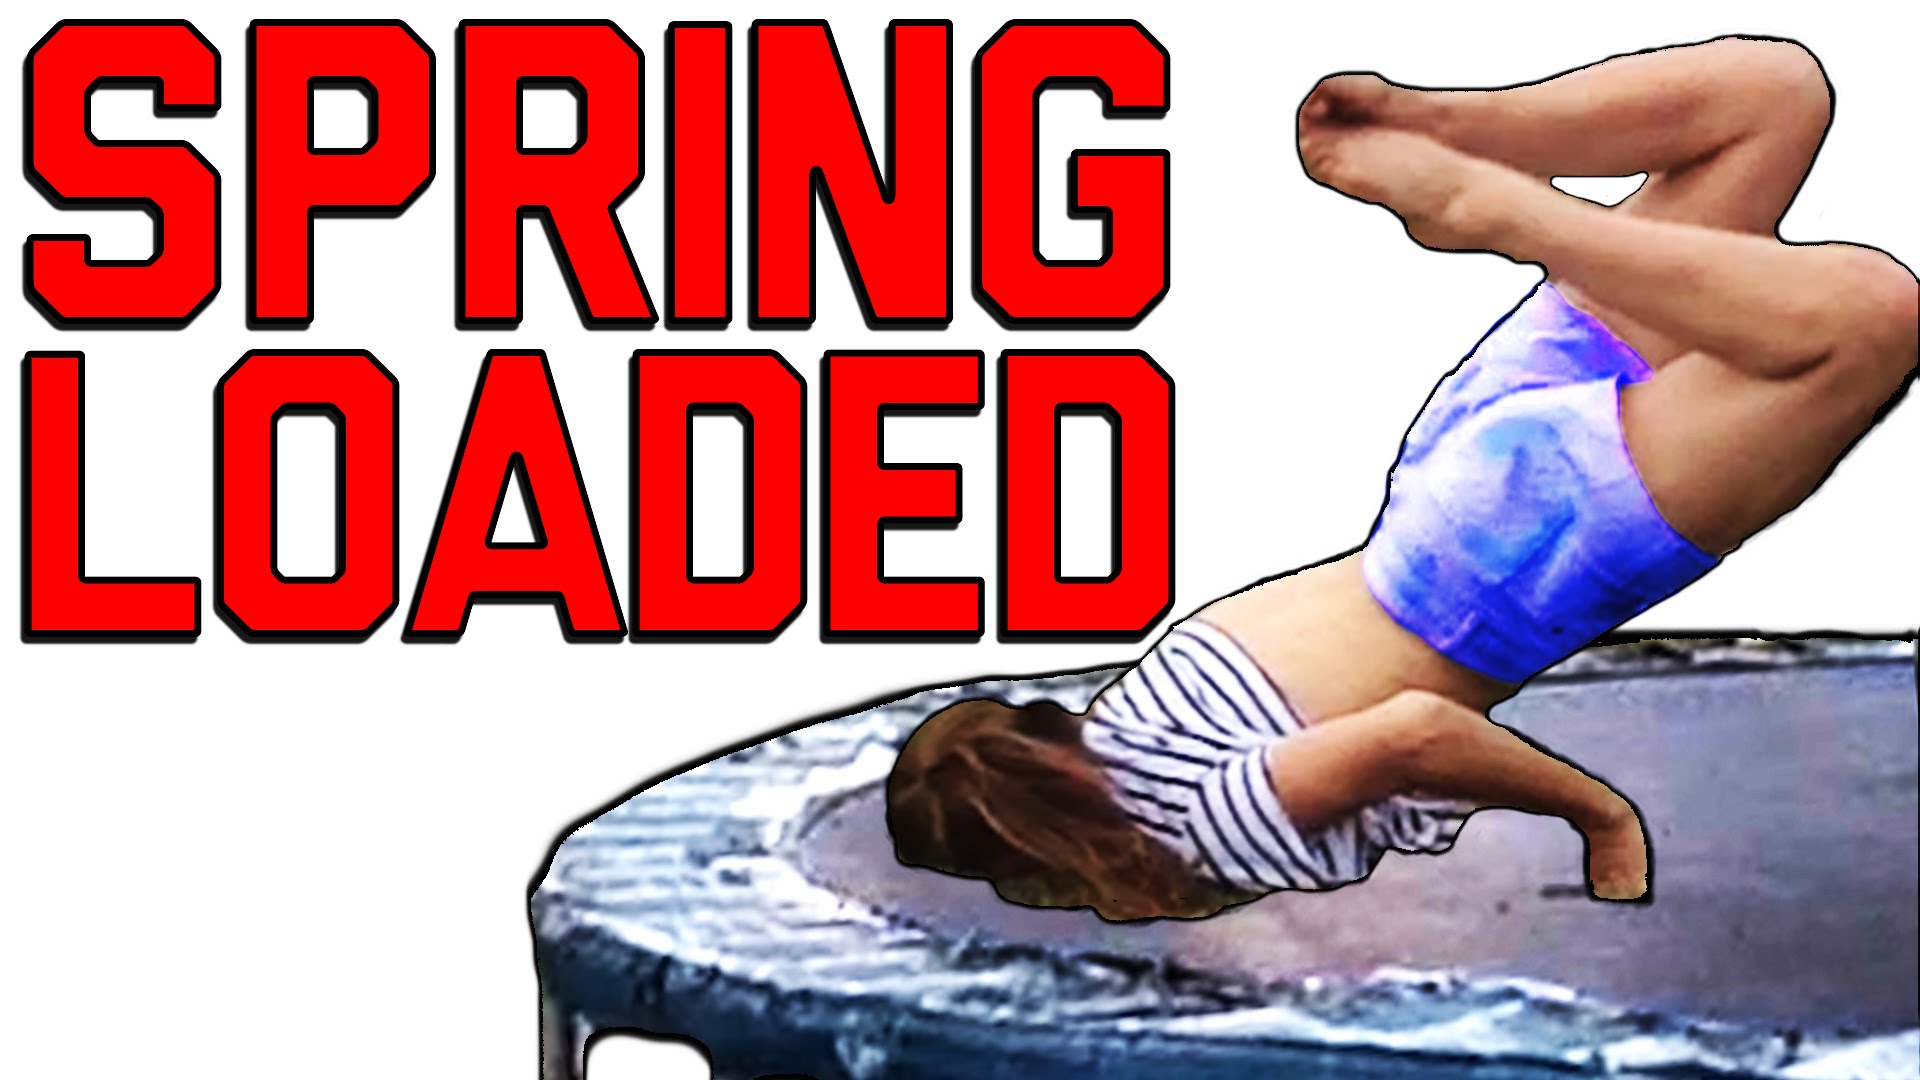 Soumo on Twitter: "Funny Spring Loaded &amp; Trampoline Fails Compilation || By #bestfails #comp... #Compilation #f... #fail #failarmy #failarmy #failarmyyoutube #fails #funnyfails #video #viral #youtube ...